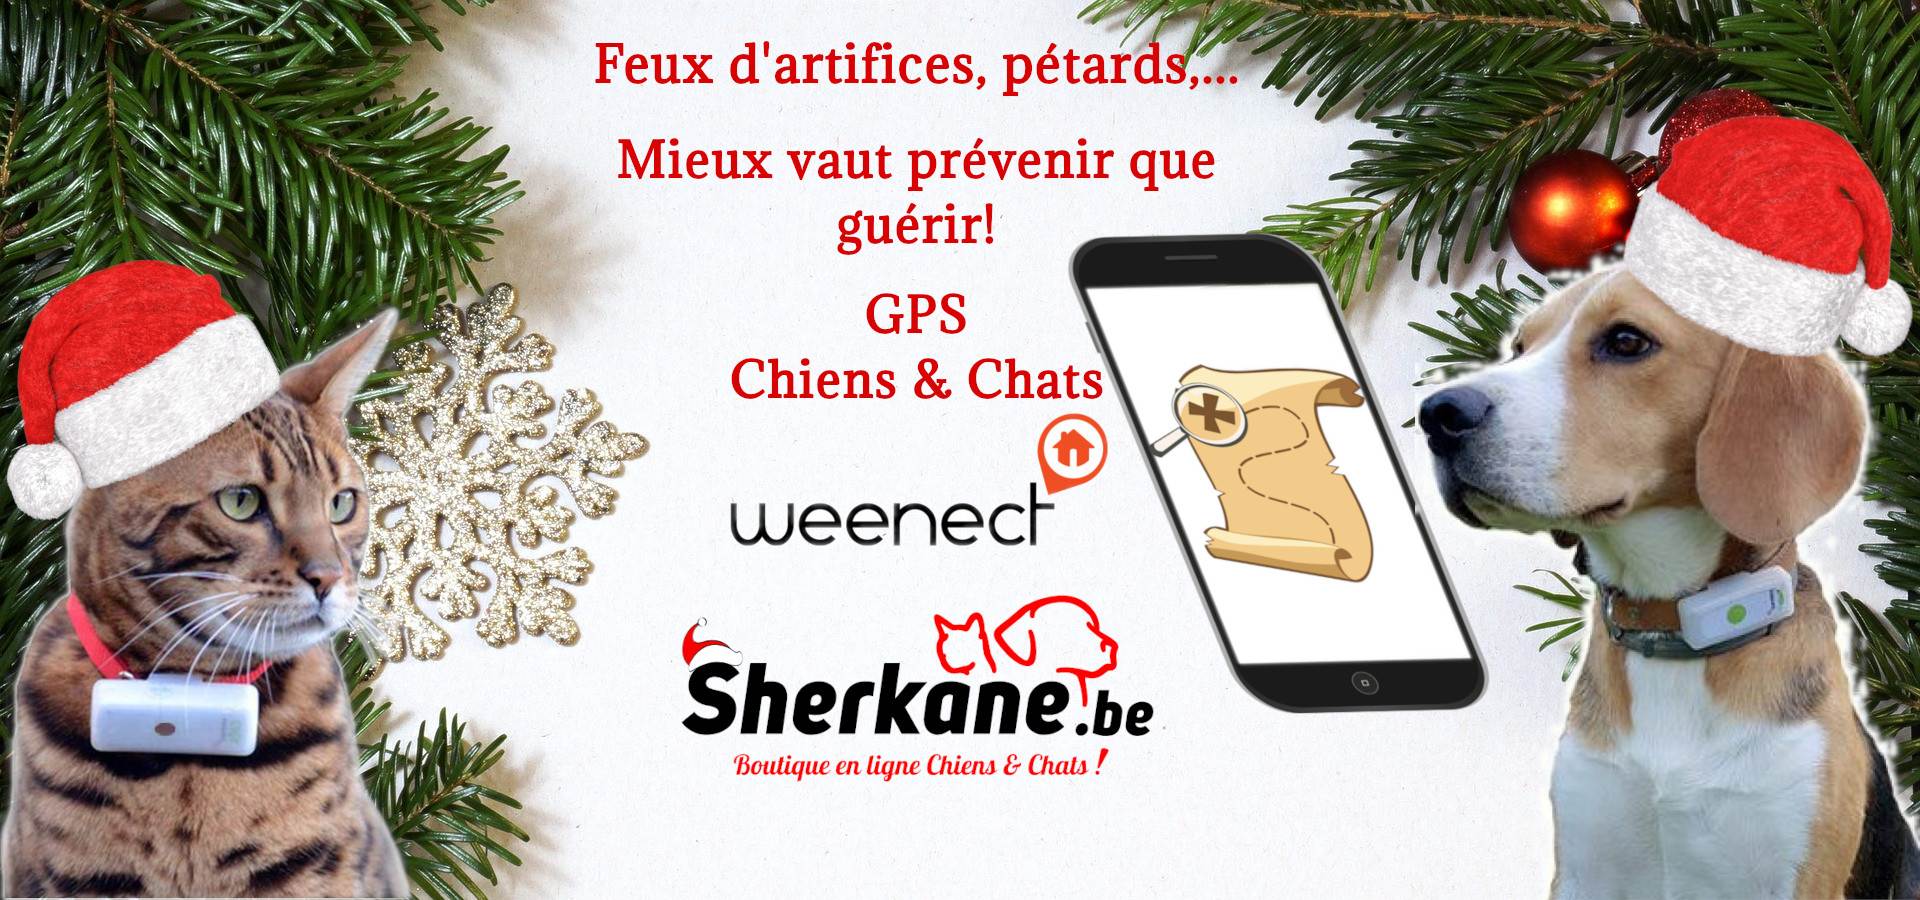 GPS Chiens & Chats